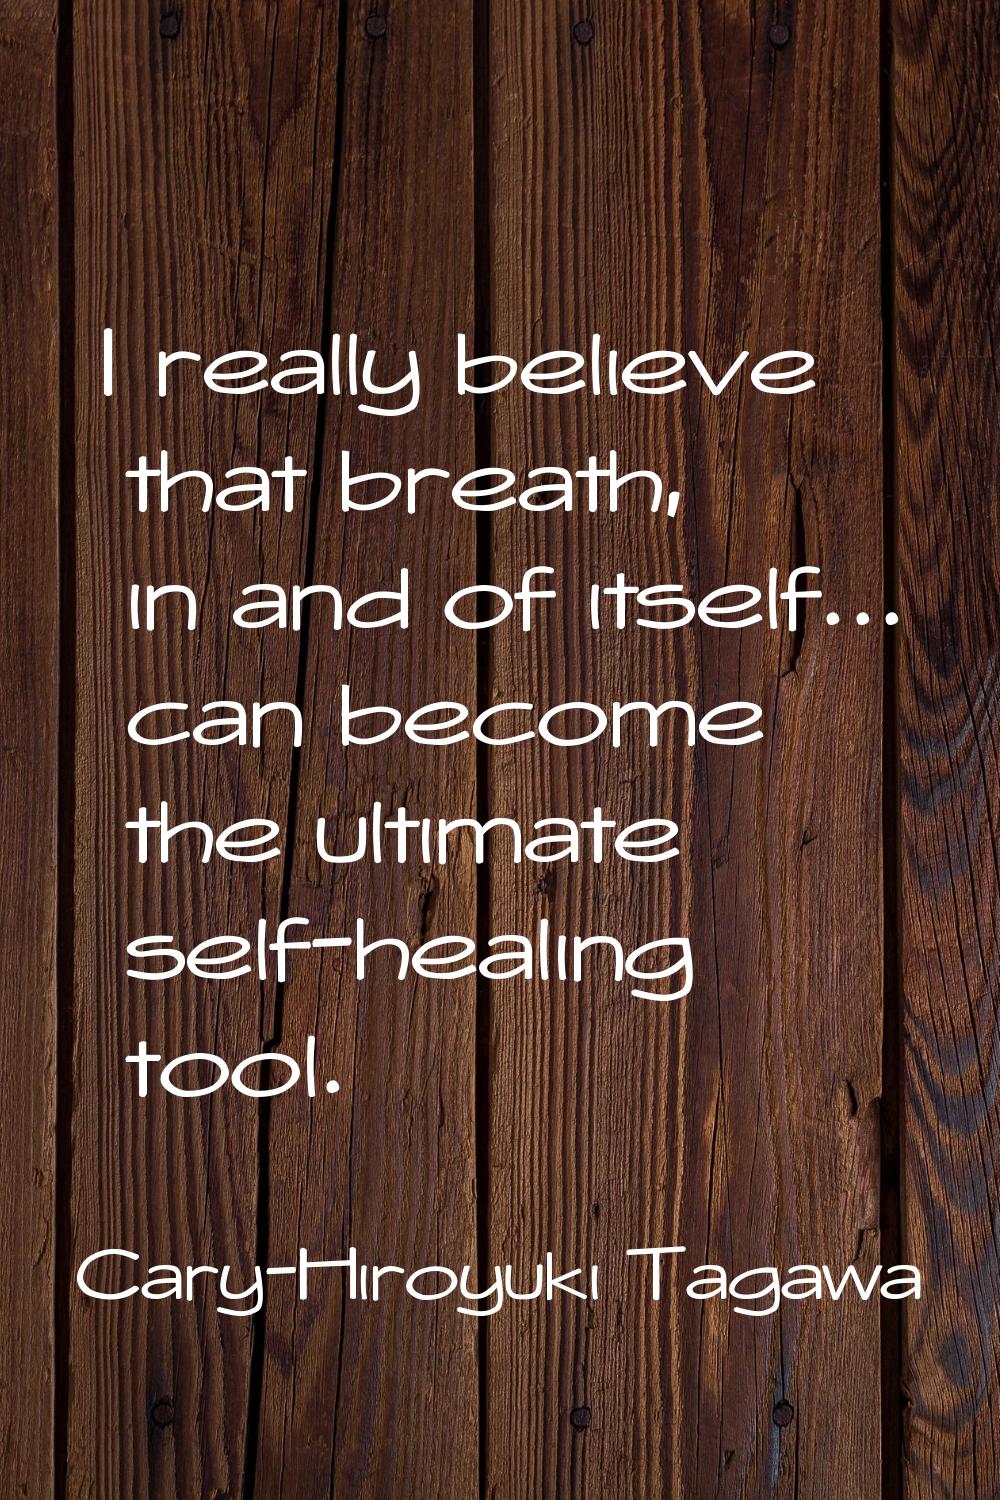 I really believe that breath, in and of itself... can become the ultimate self-healing tool.